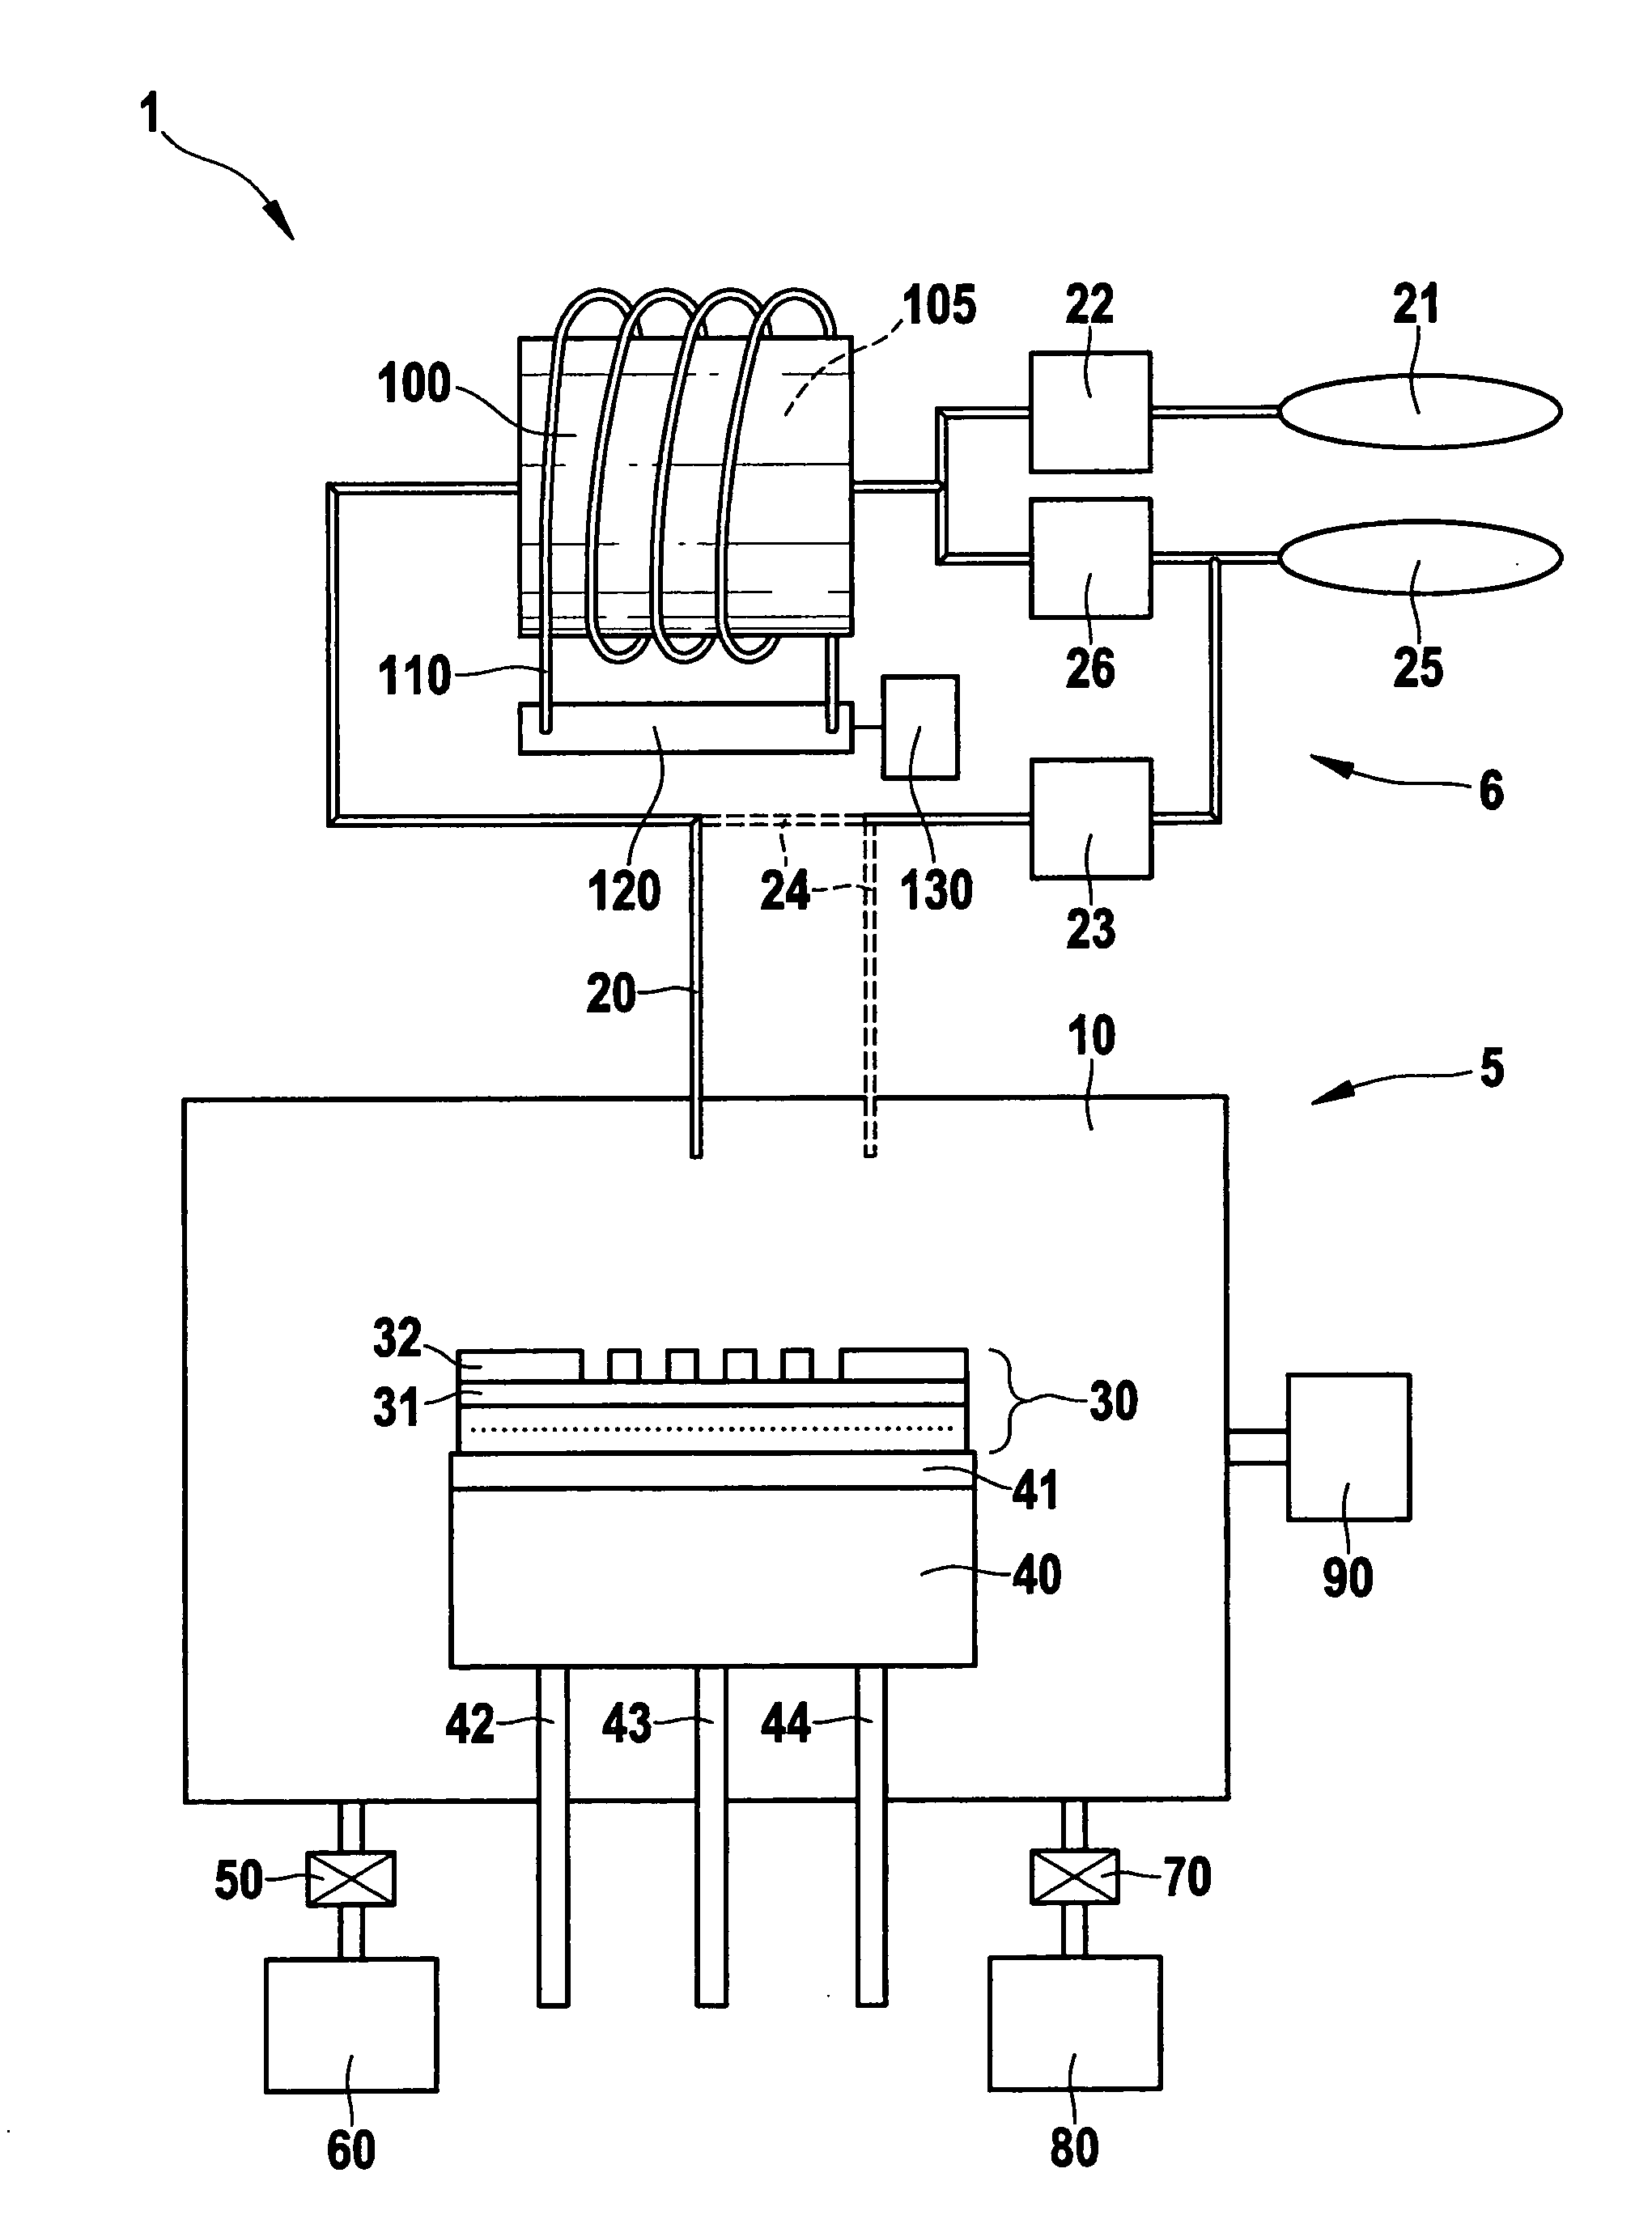 Method for etching a layer on a silicon semiconductor substrate